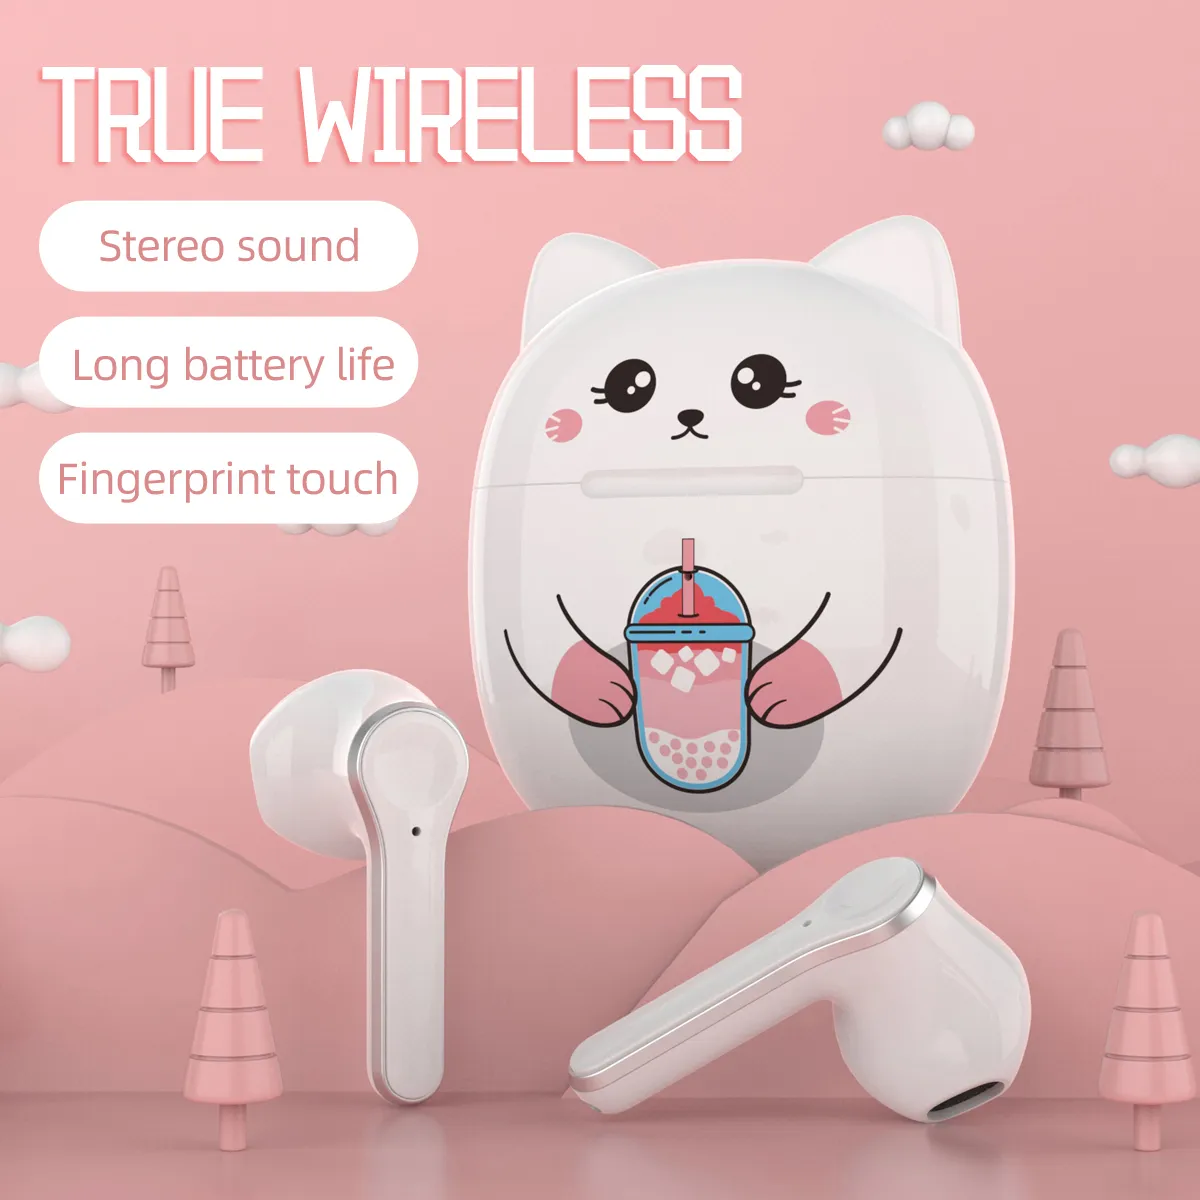 T18a wireless Bluetooth headset cute cat two ear music earplug earpiece with charging case headphone suit for smartphone headphones for girls earbud by kimistore1